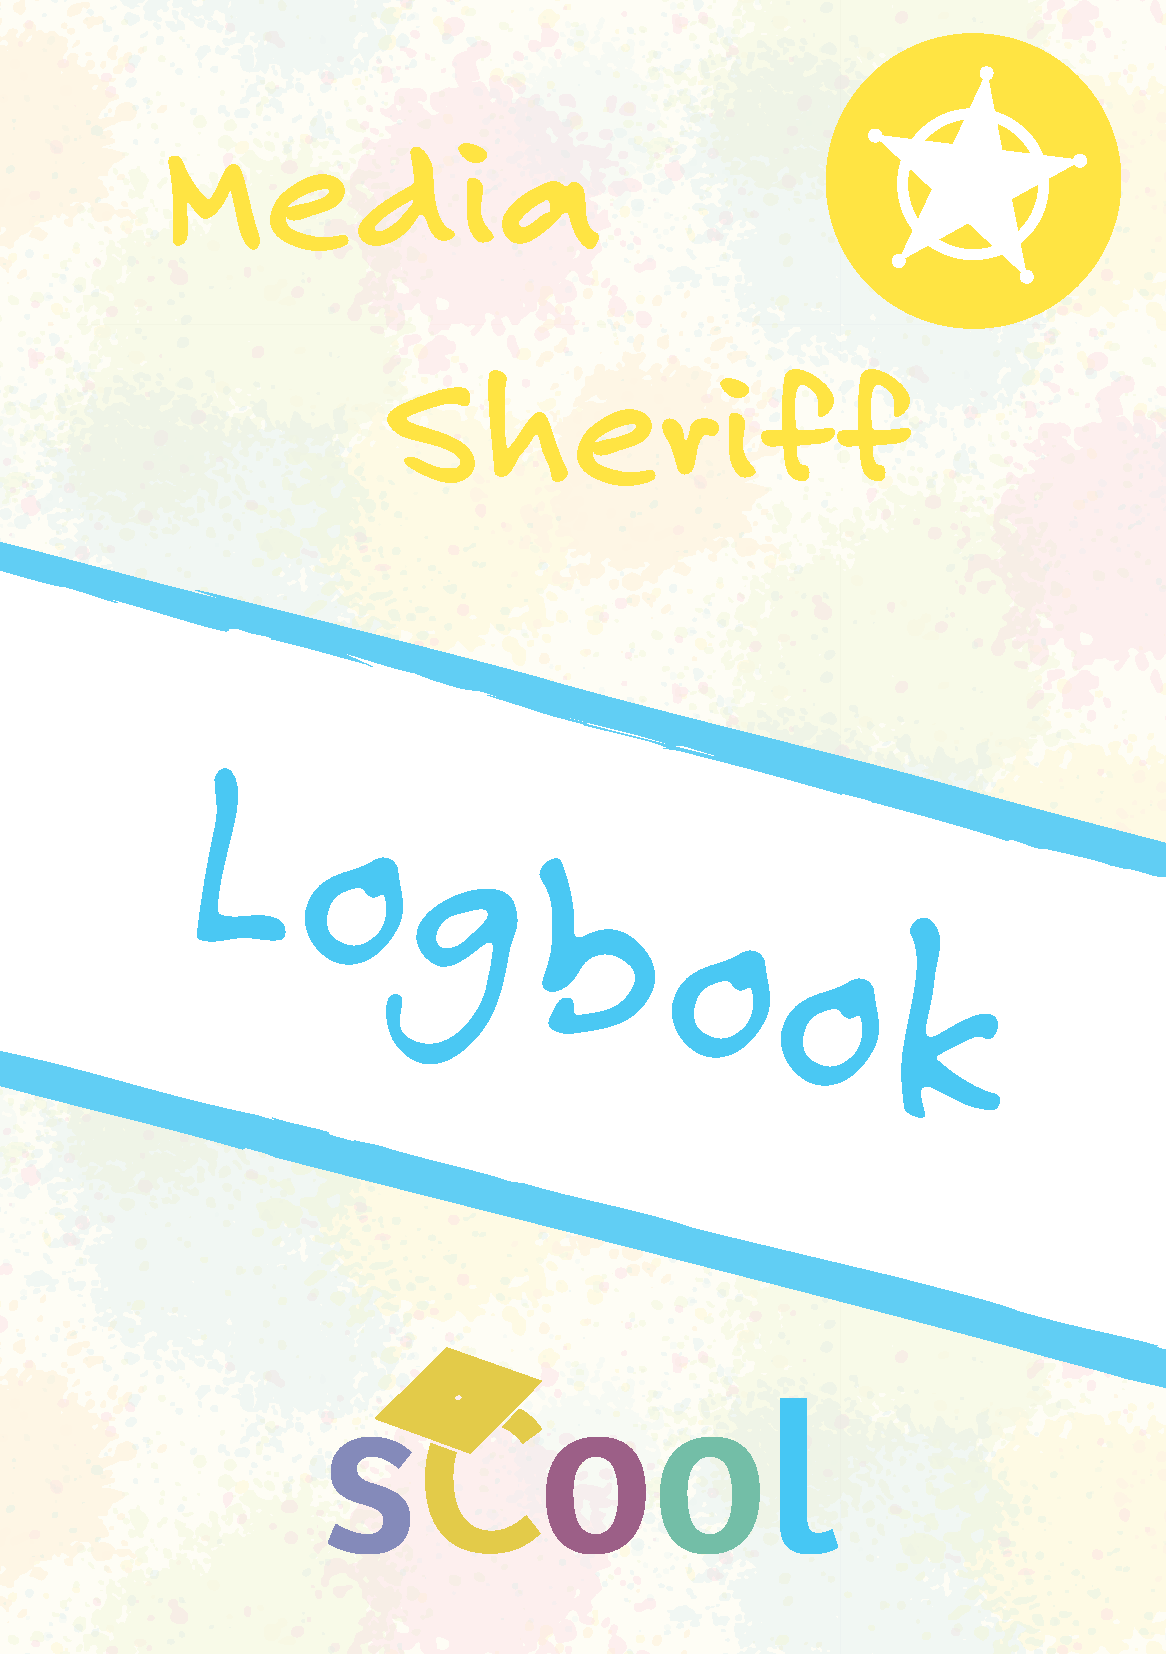 Logbook%20Media%20Sheriff%20-%20Web_Page_1.png